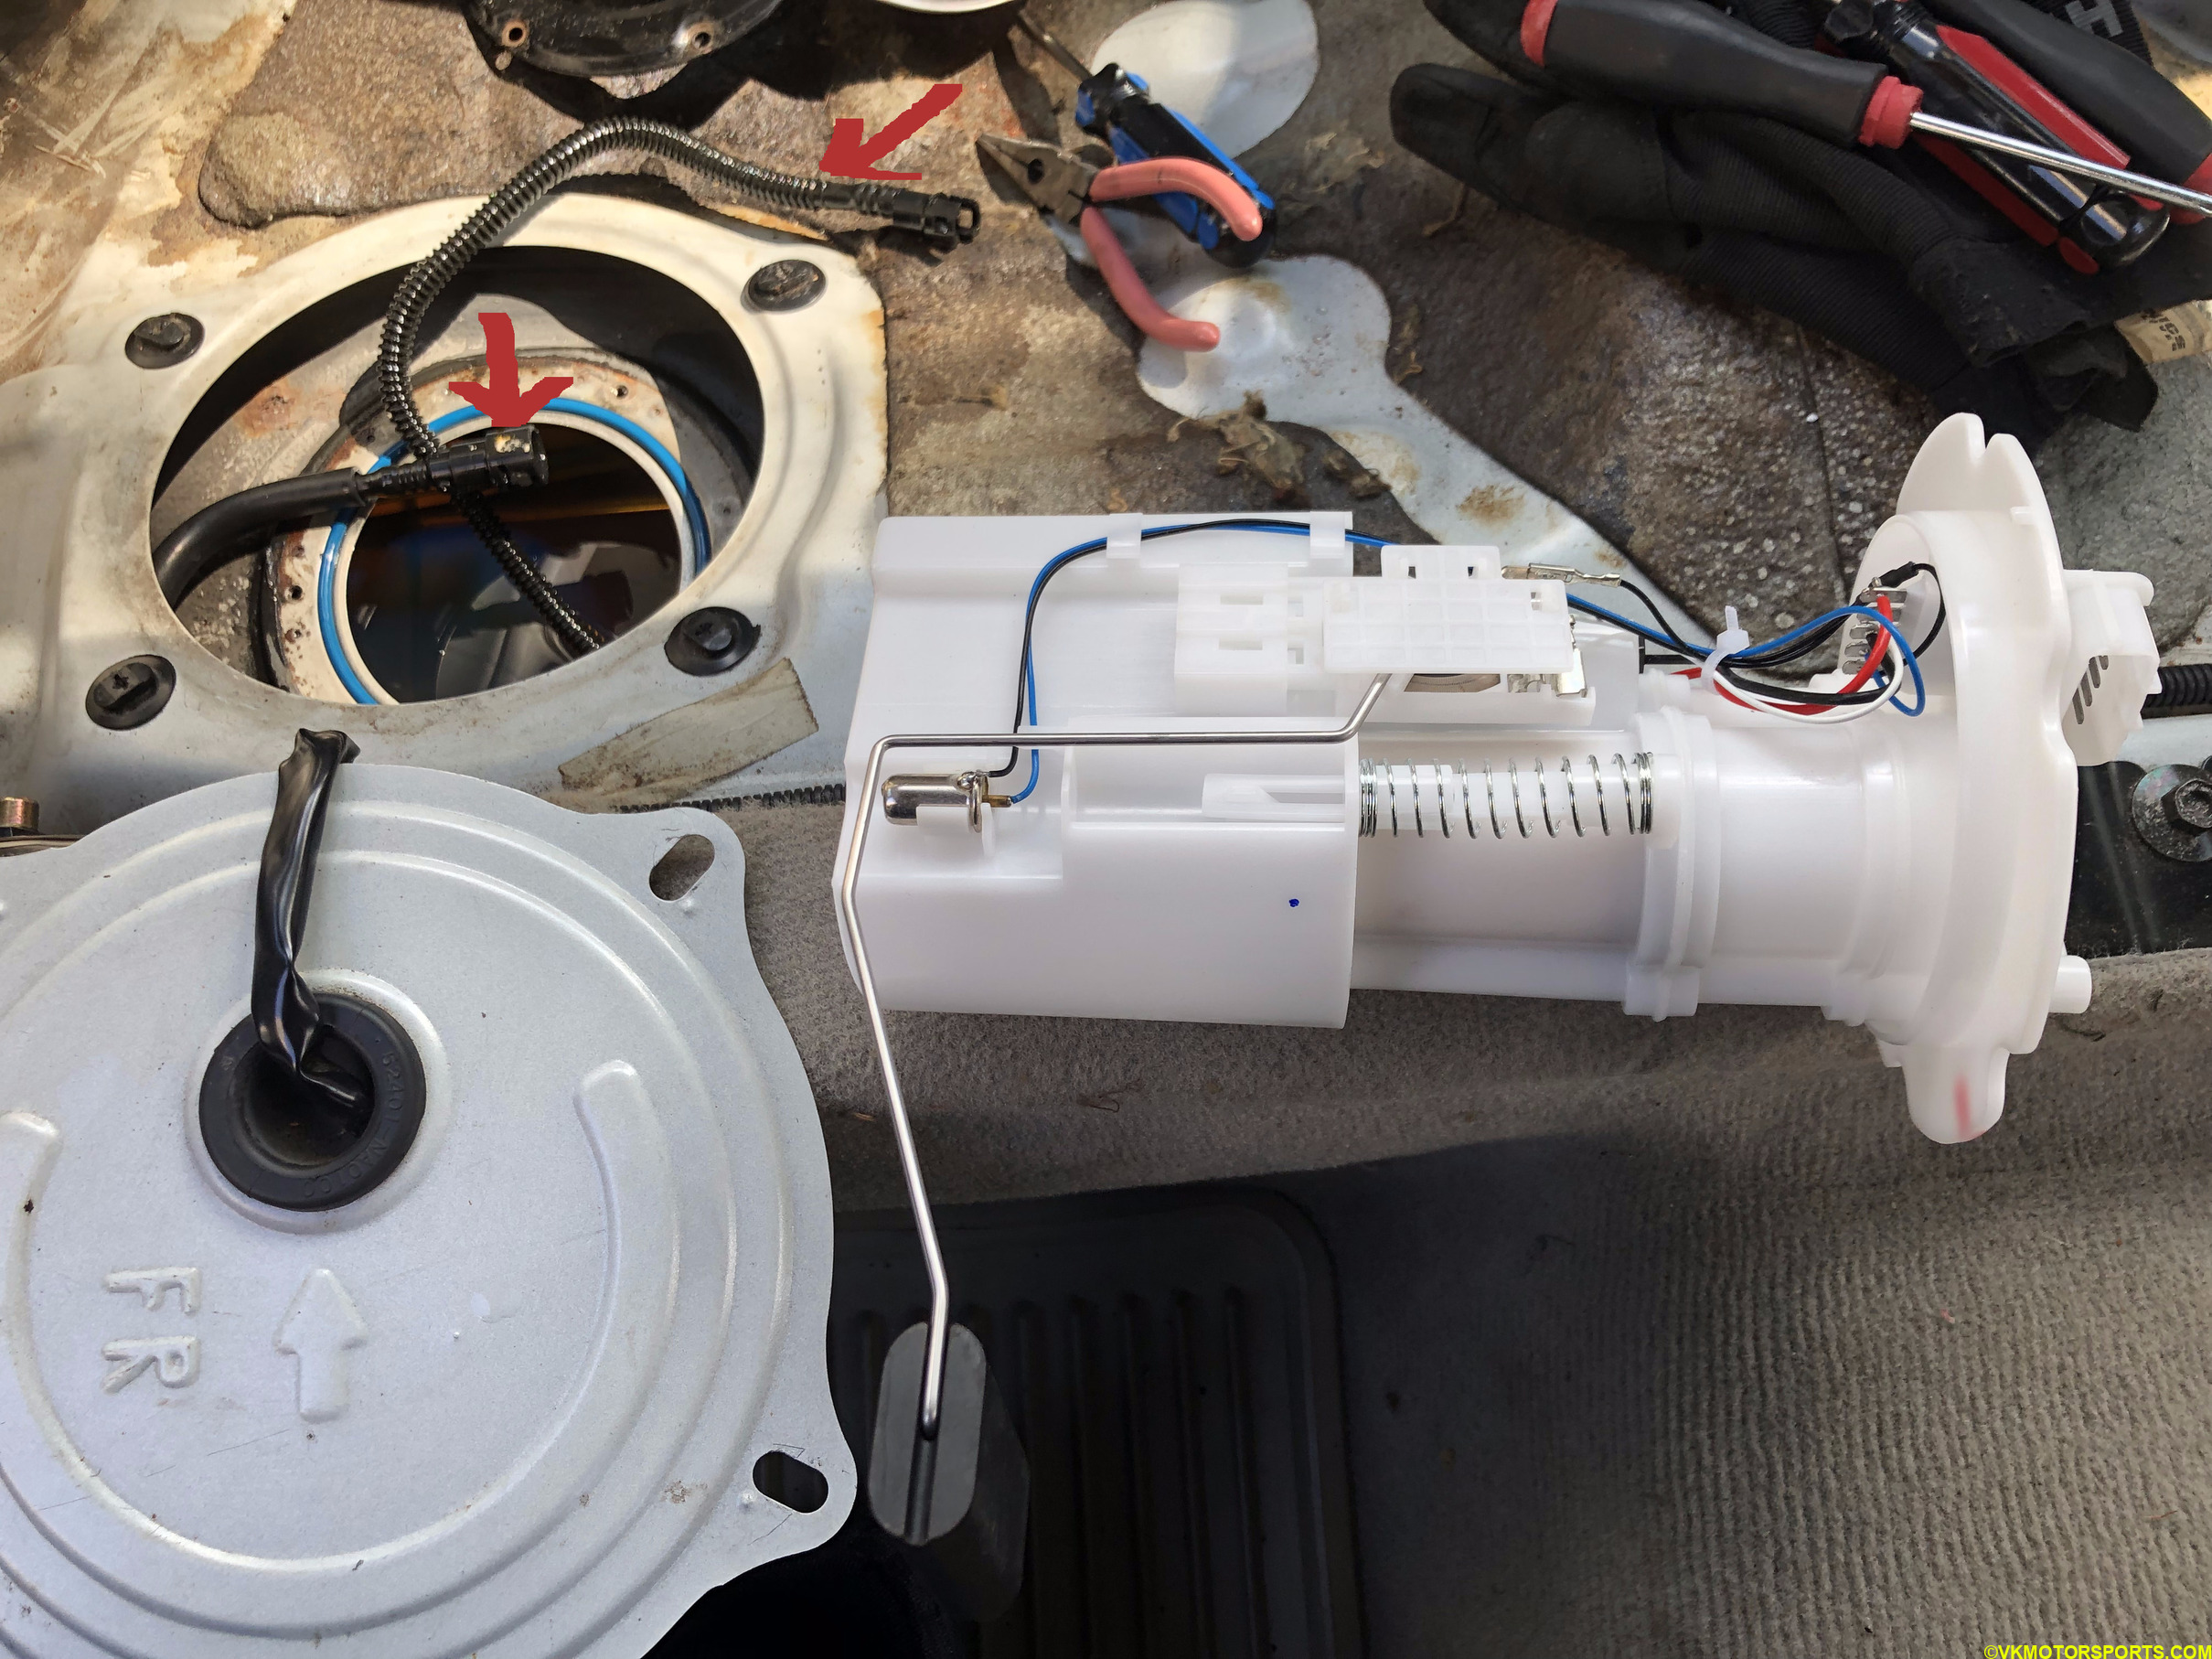 Figure 4. New fuel pump installation showing two fuel hoses